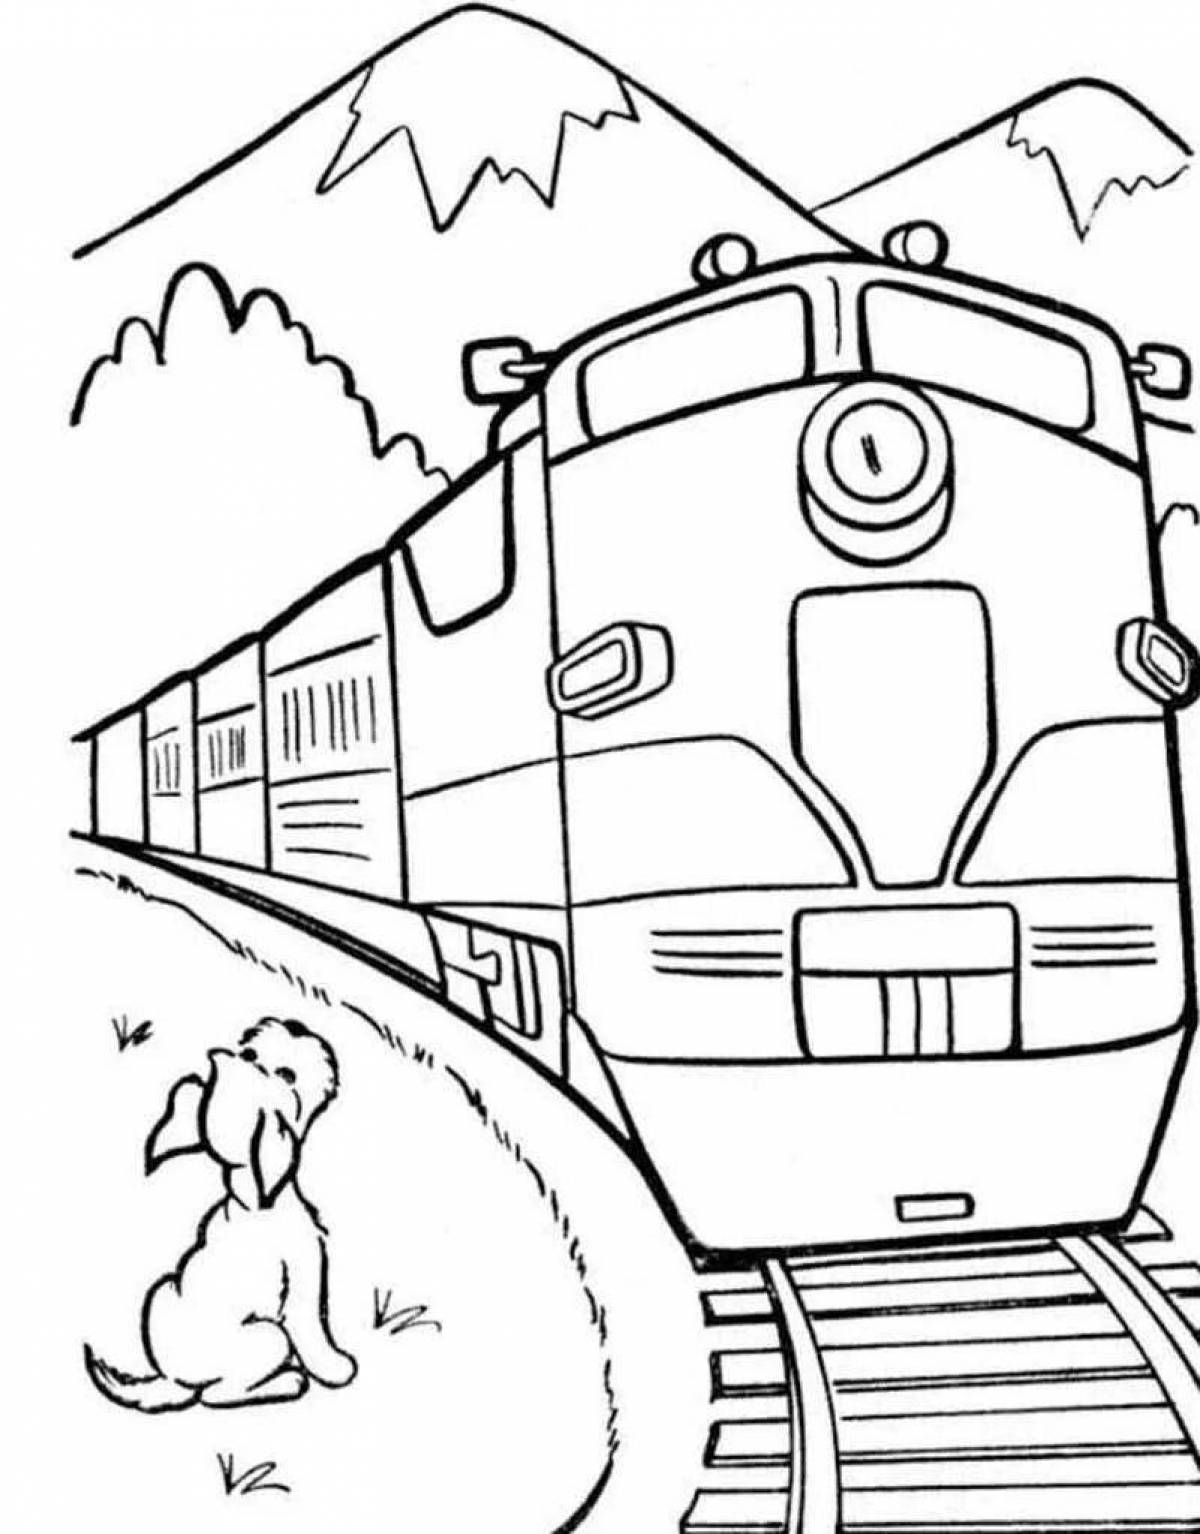 Artistic drawing of a train